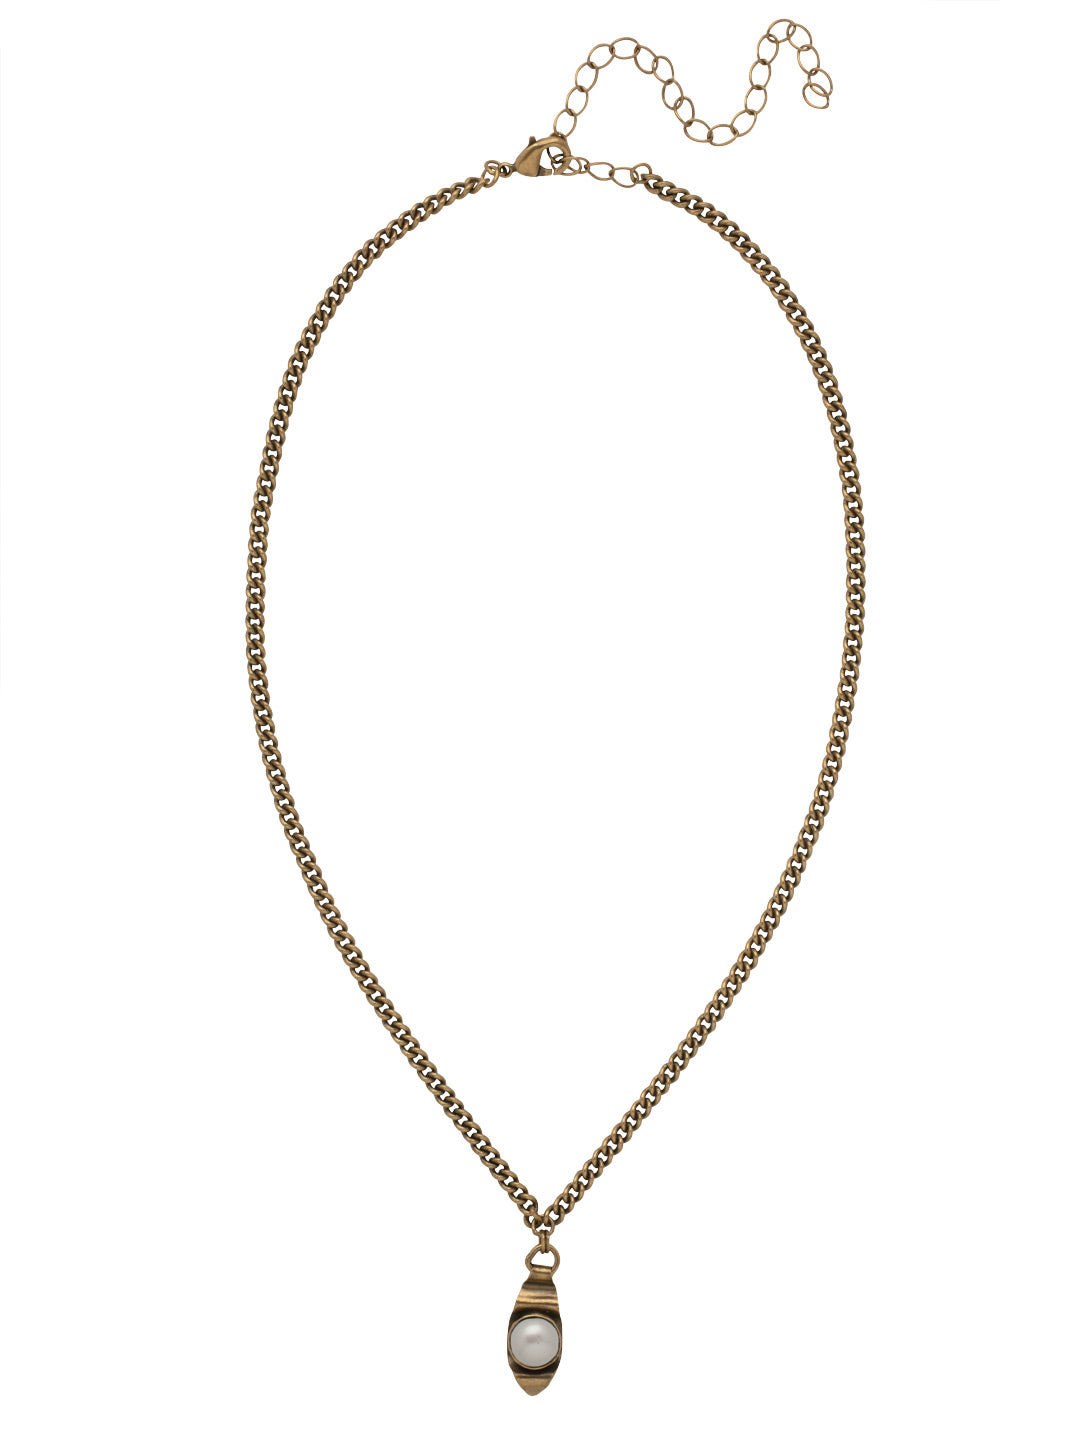 Katrina Pendant Necklace - 4NFF50AGMDP - <p>The Katrina Pendant Necklace features a curved metal bezel with a single freshwater pearl, hanging from an adjustable chain, secured with a lobster claw clasp. From Sorrelli's Modern Pearl collection in our Antique Gold-tone finish.</p>